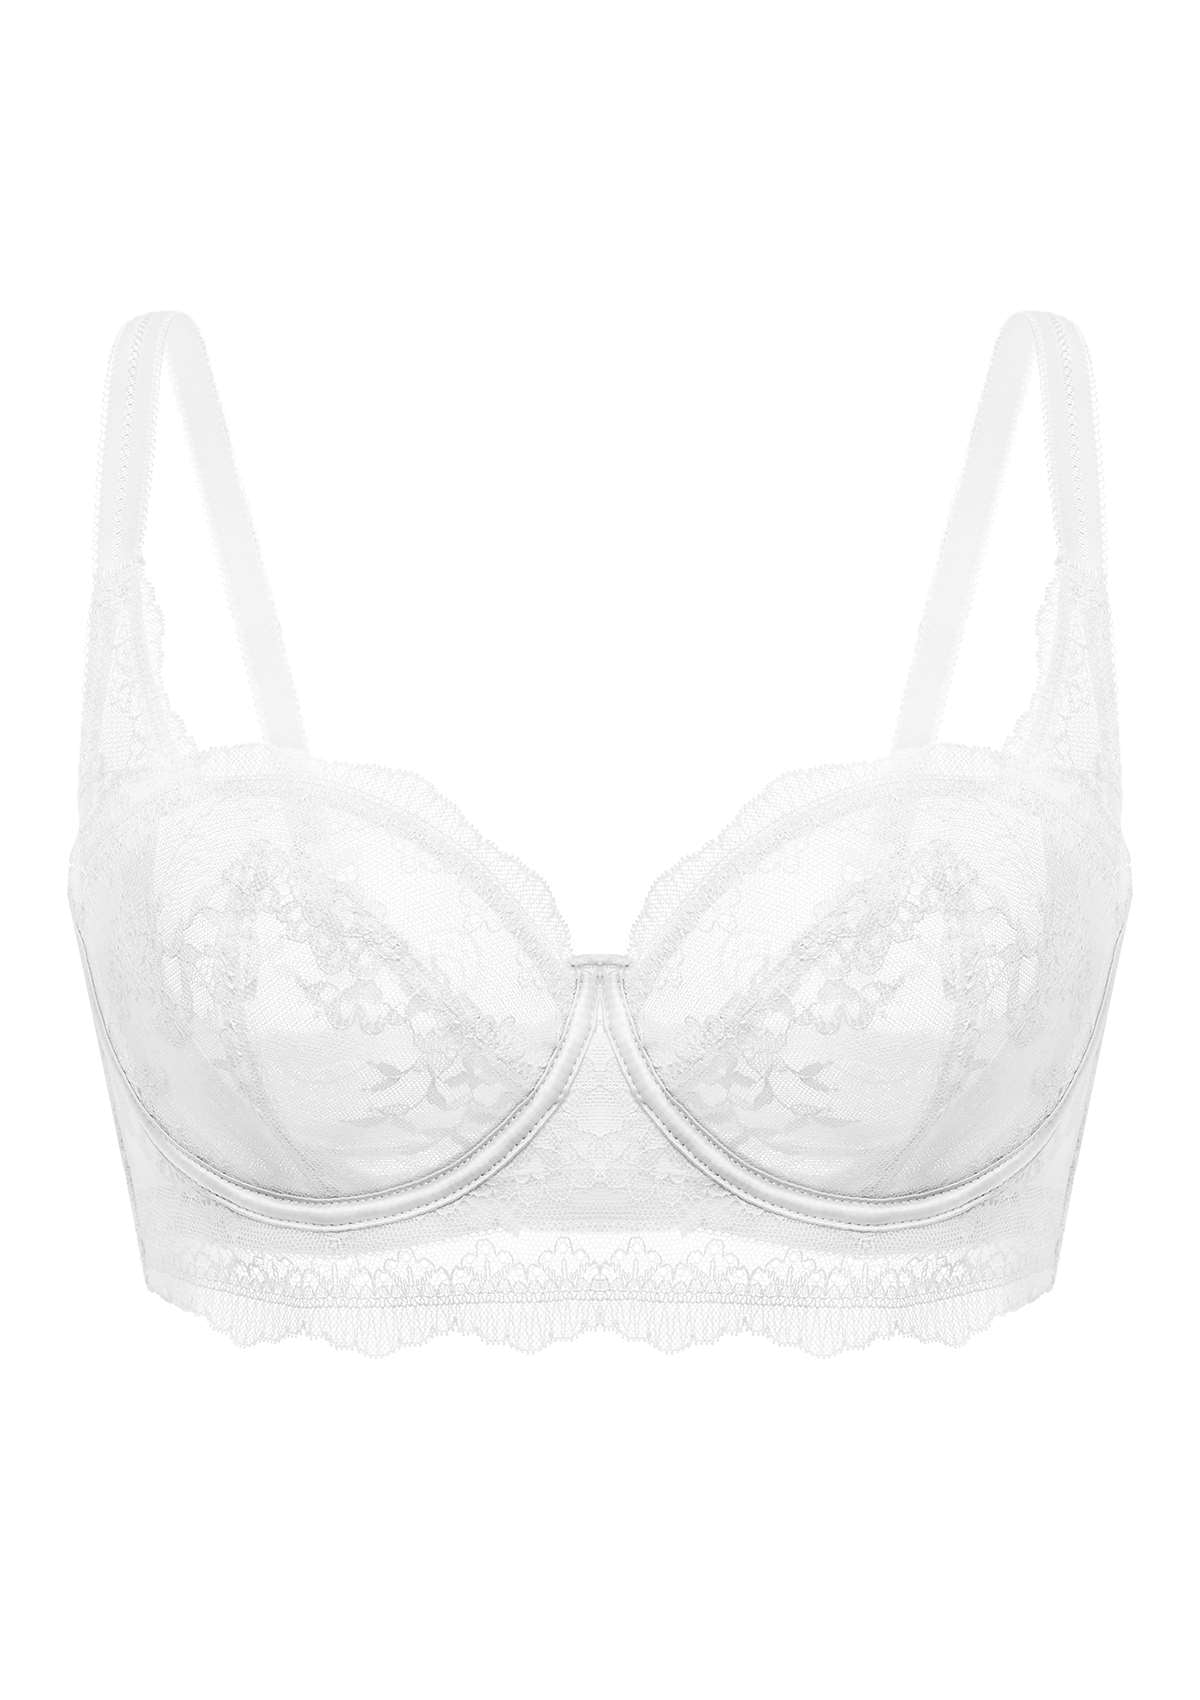 HSIA I Do Floral Lace Bridal Balconette Beautiful Bra For Special Day - Burgundy / 38 / DDD/F